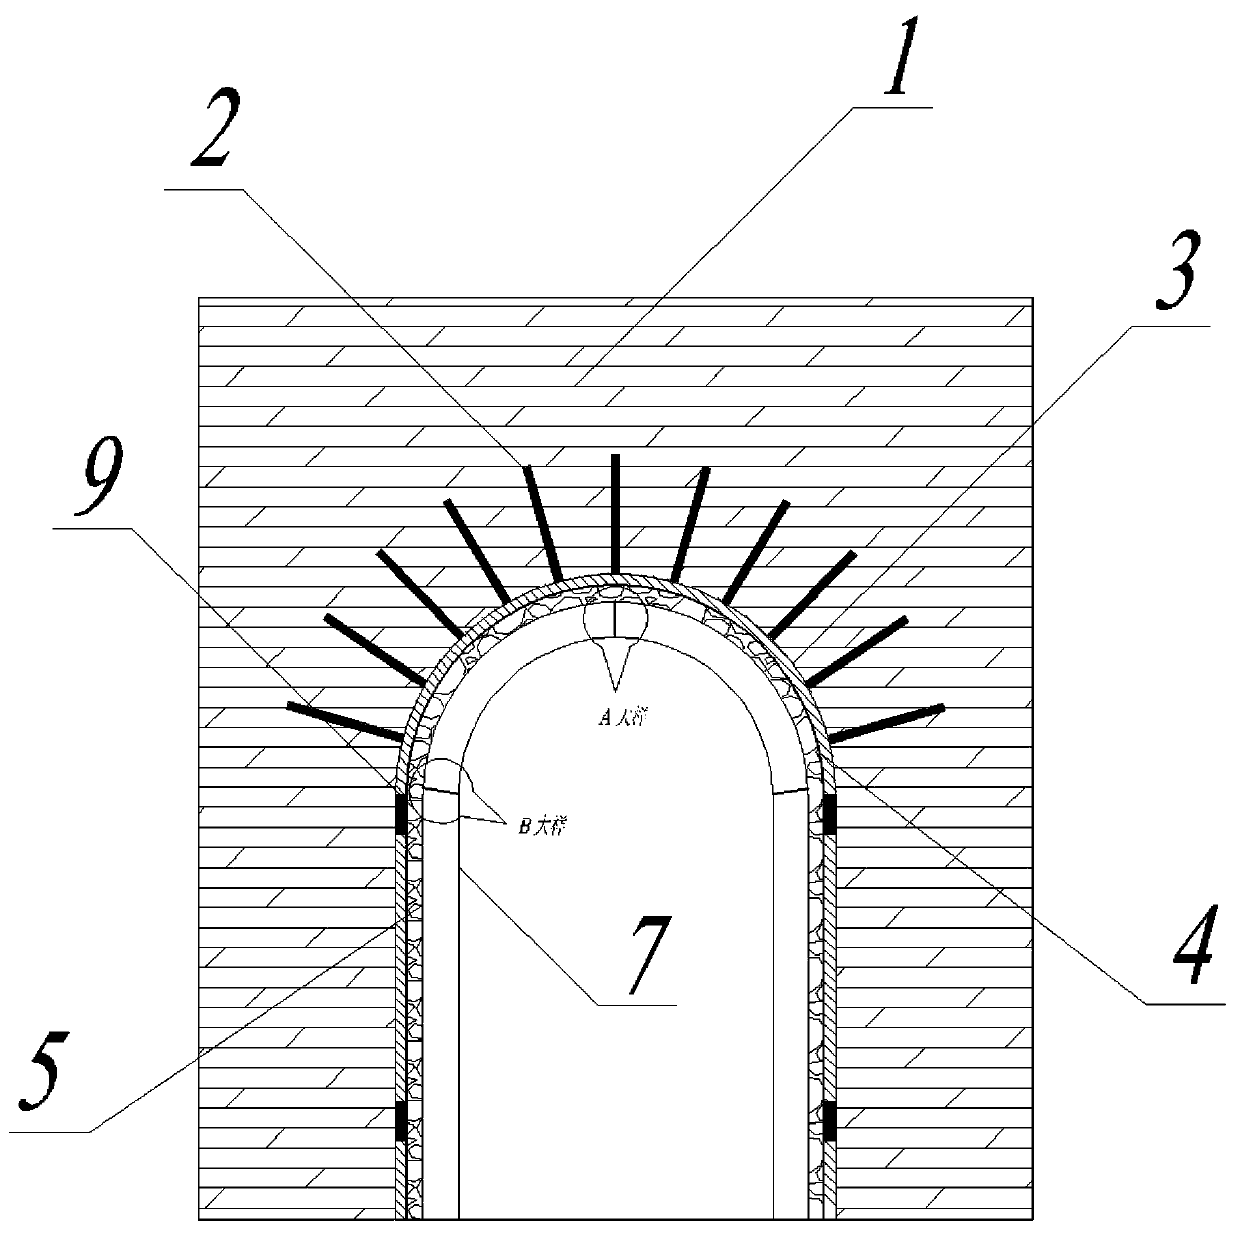 A tunnel lining structure and construction method filled with ceramsite